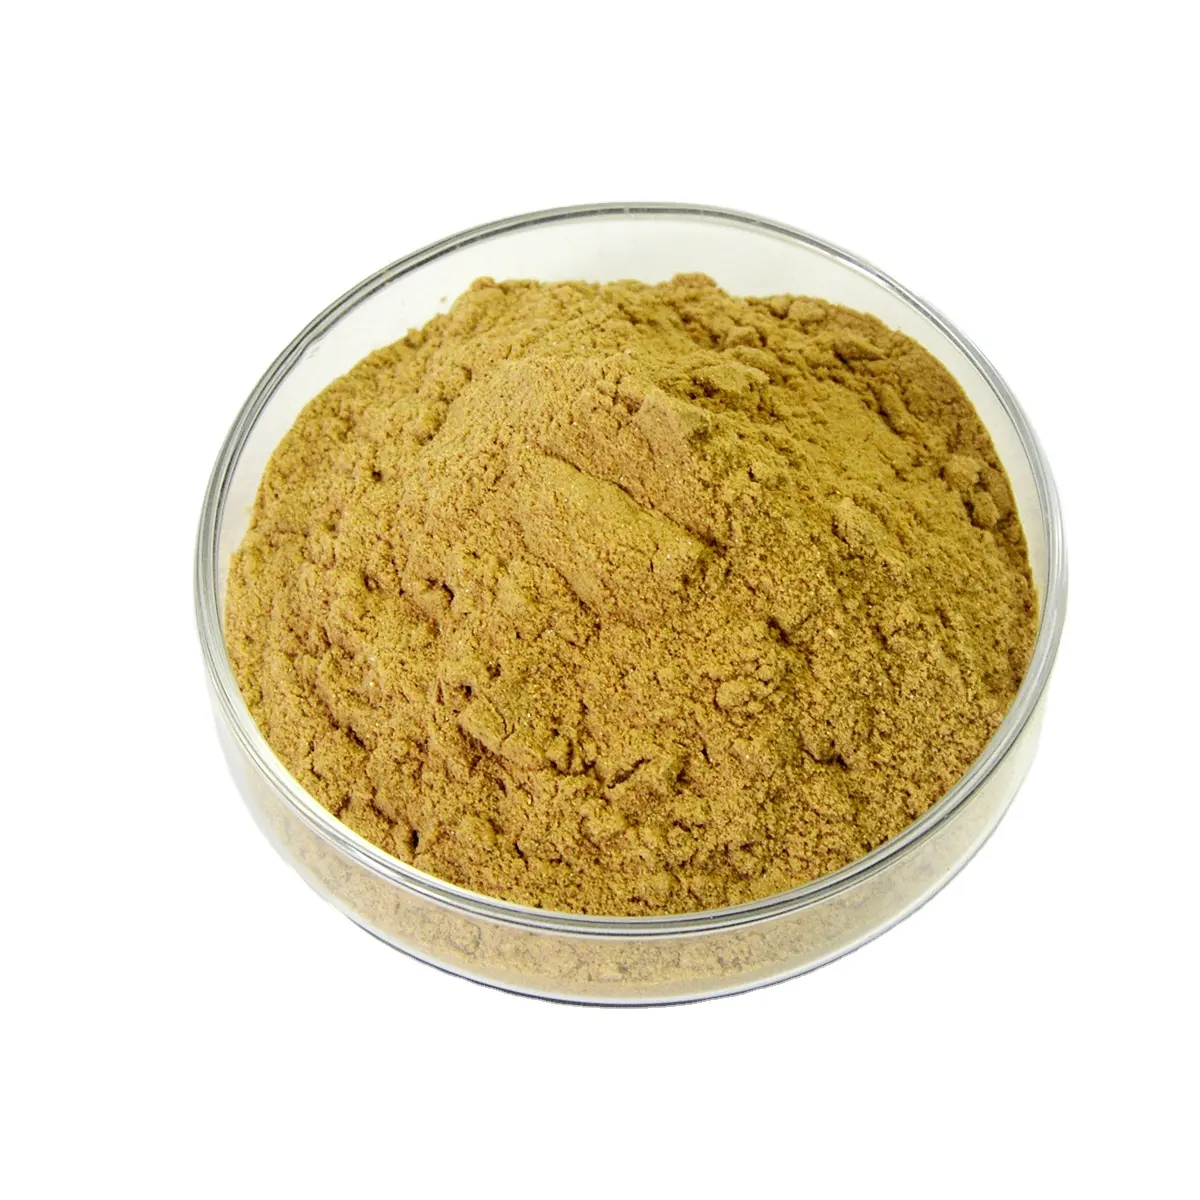 ShuangHuangLian plant extract Mixture Scutellaria Extract Forsythiae Fructus Extract